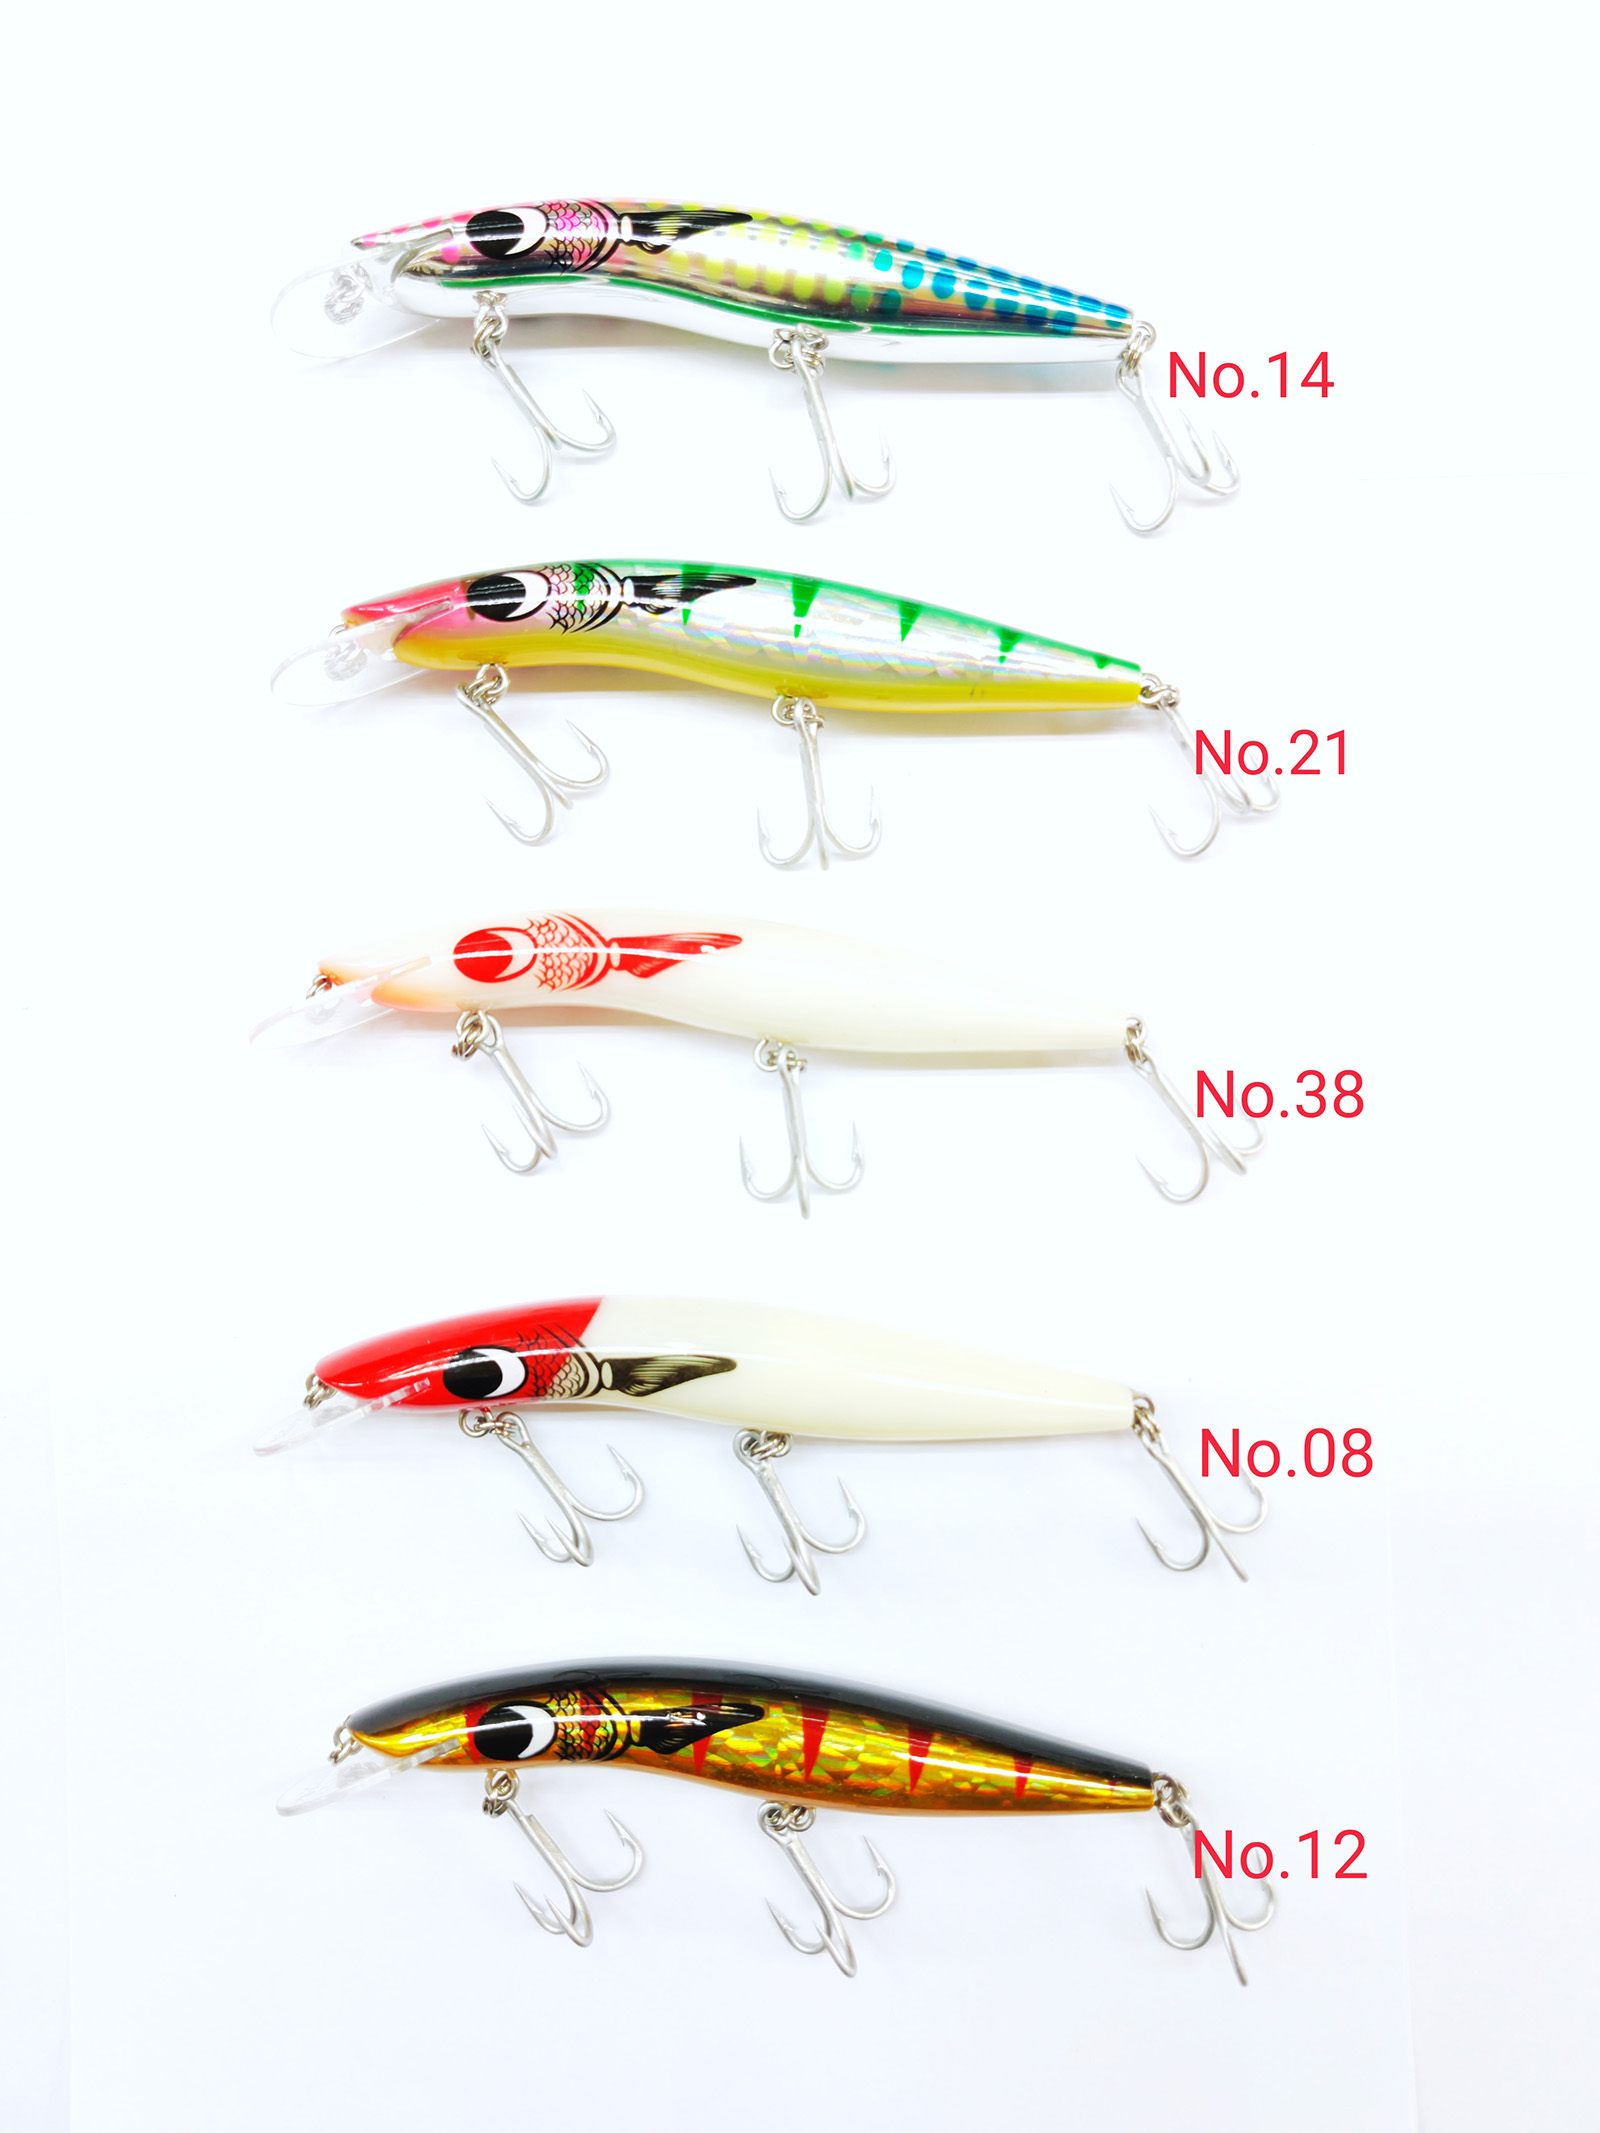 Gillies Lures – Classic 120 Barra 1M+ fishing lures online in India